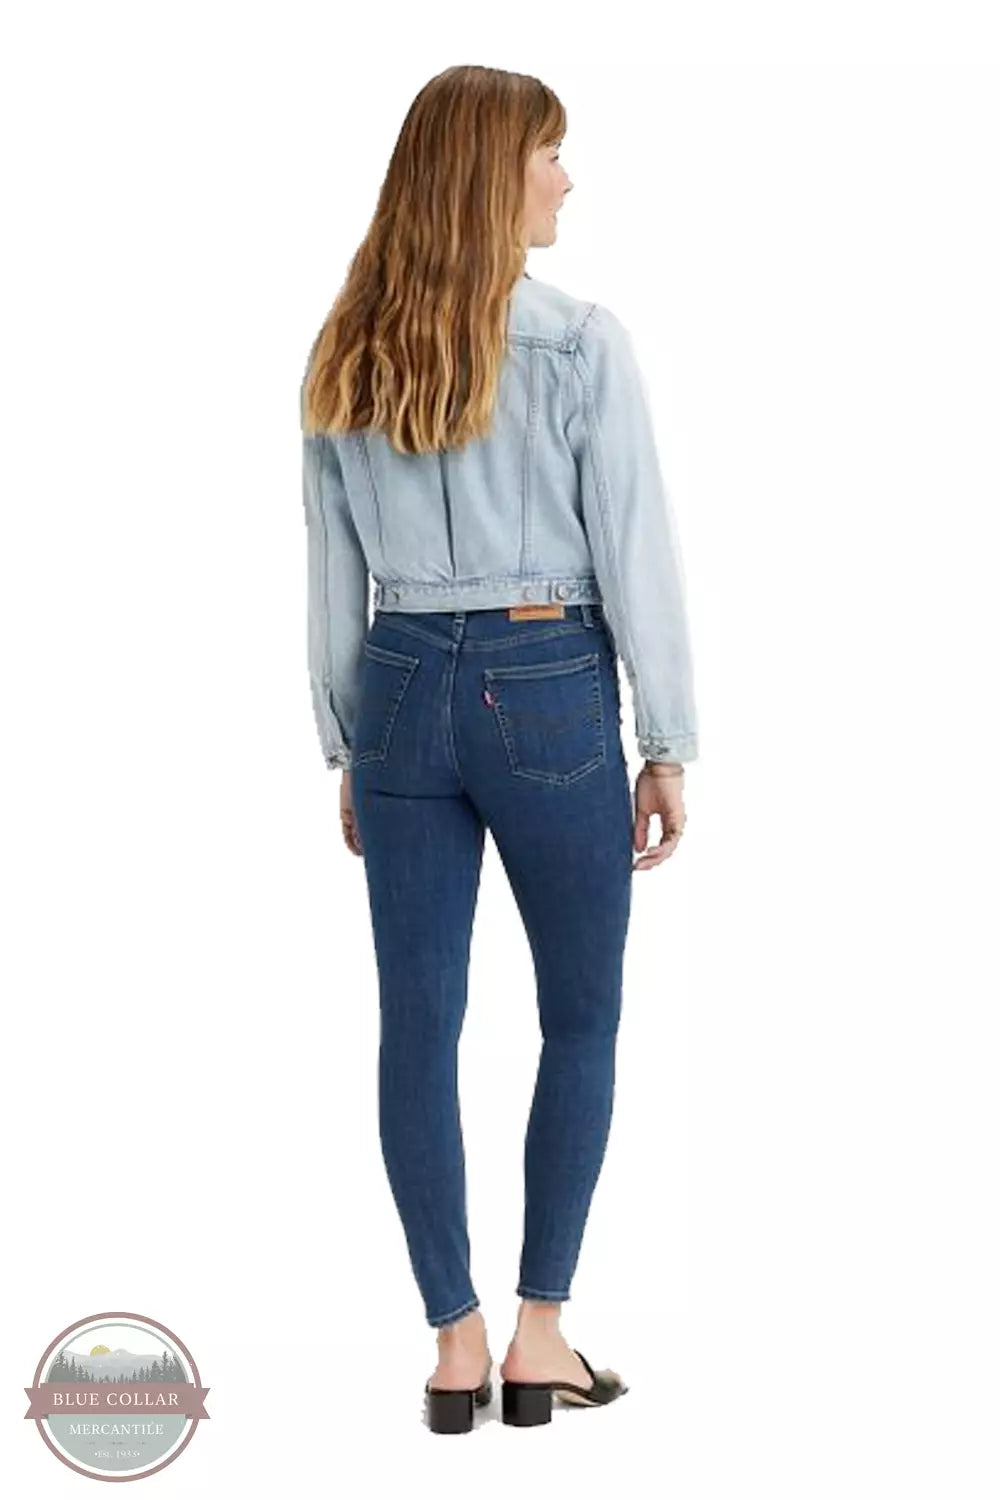 721 High Rise Skinny Jeans in Lapis Longing by Levi's 18882-0483